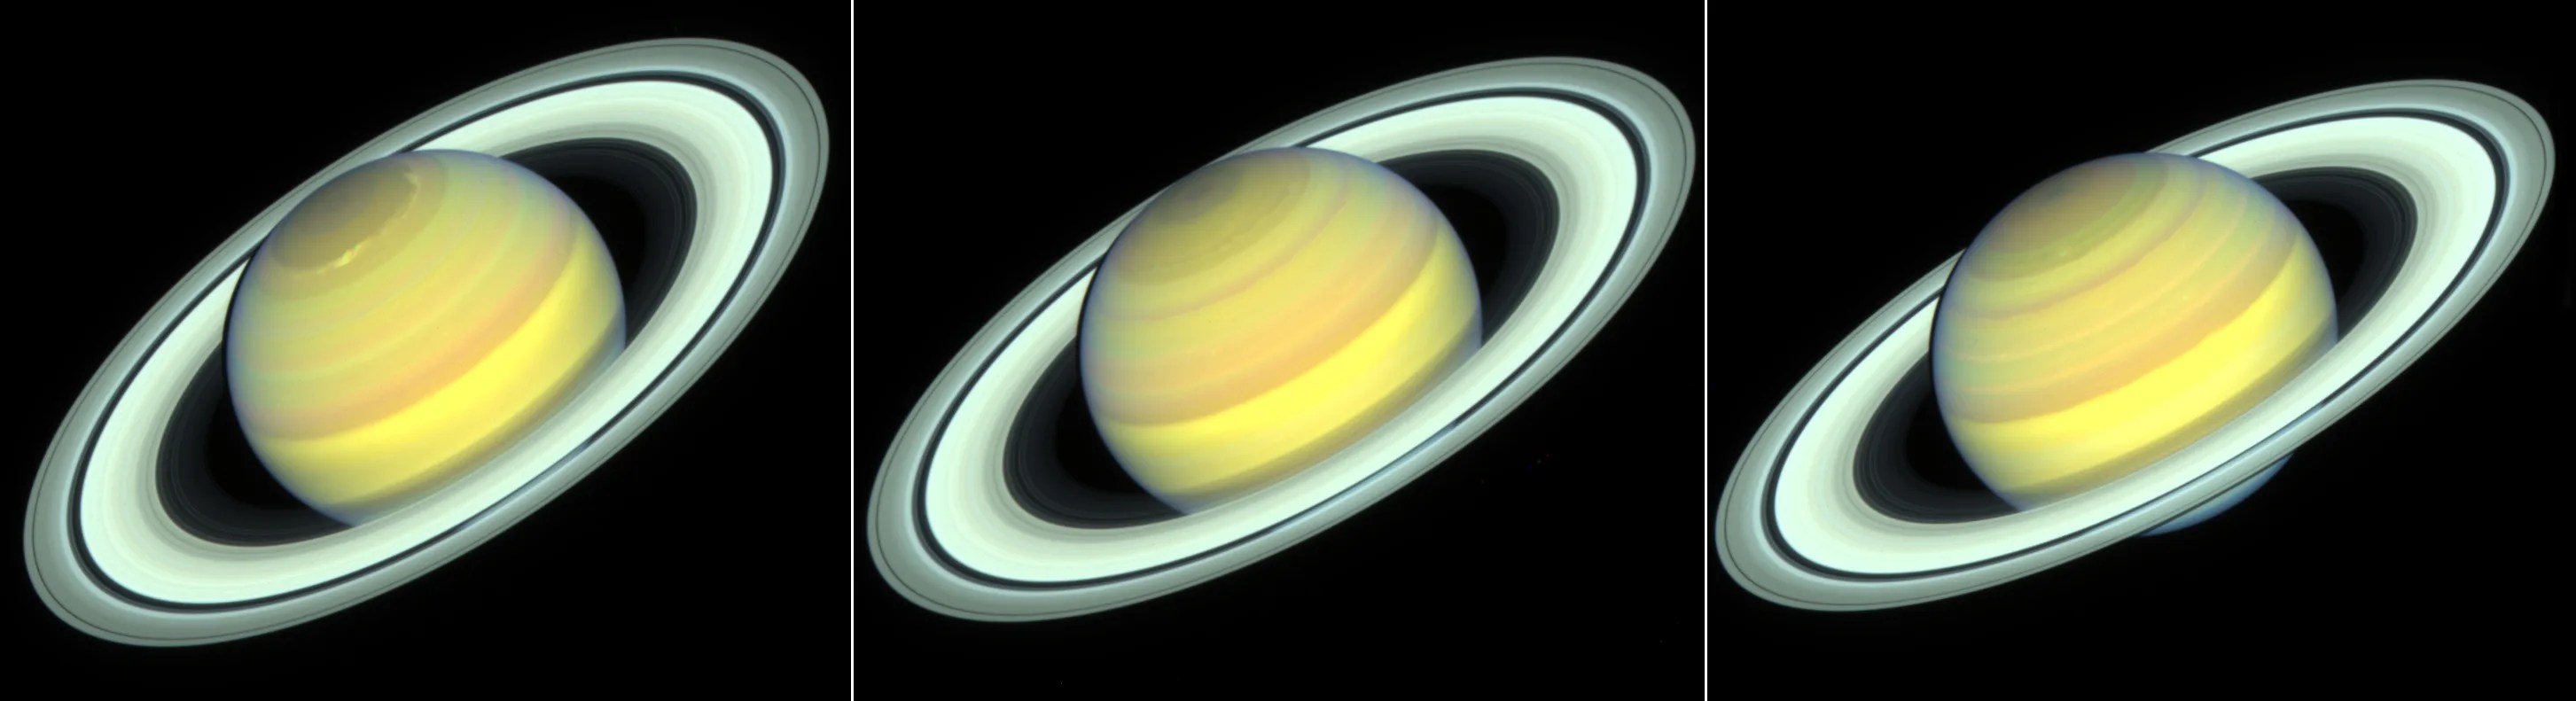 Hubble images of saturn